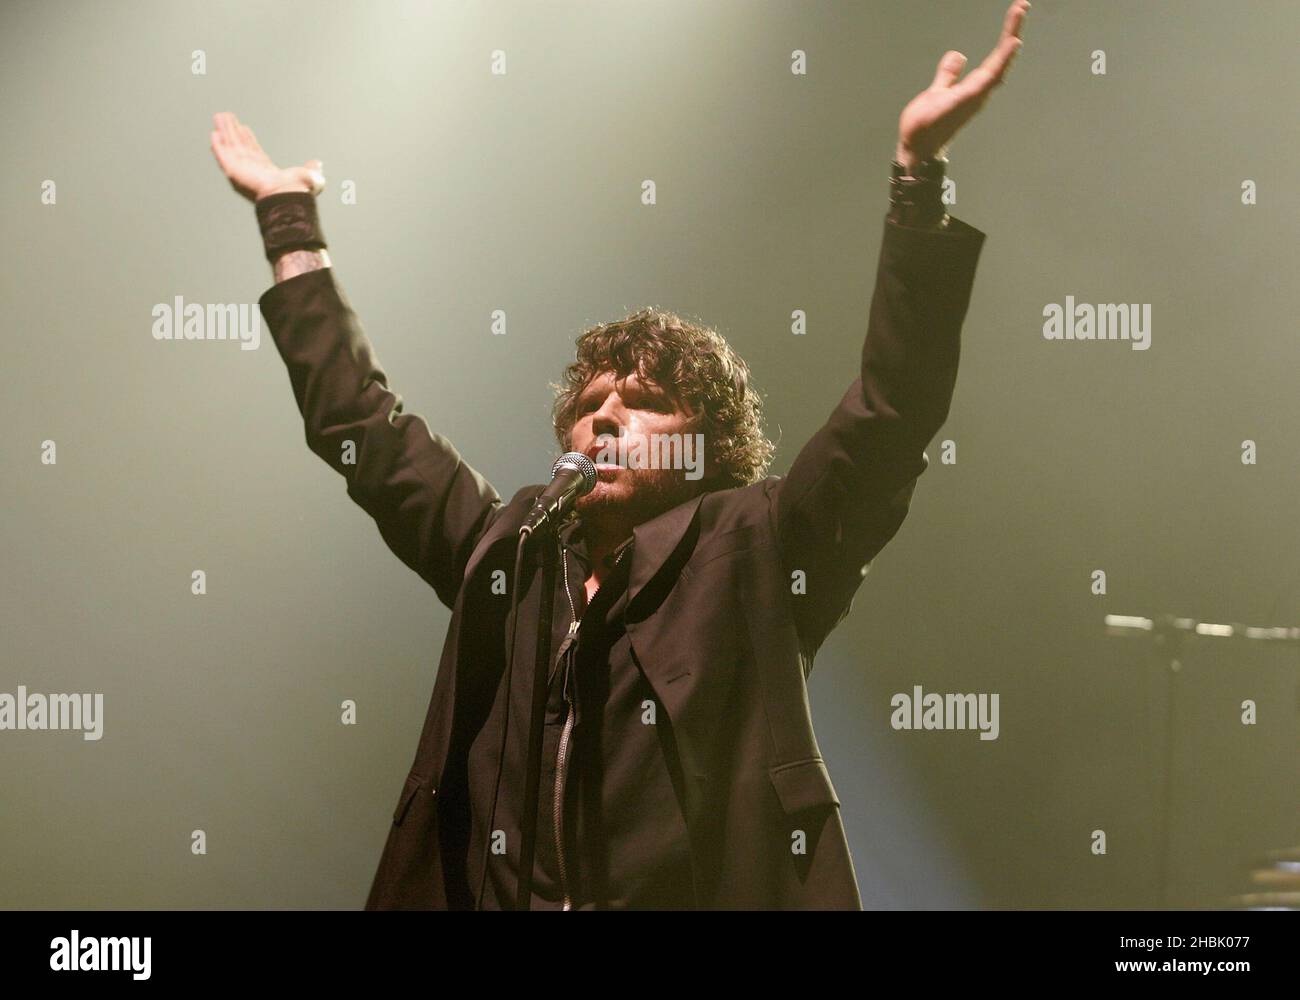 Ian Astbury of The Cult performing at Brixton Academy, London on September 22, 2006. Stock Photo